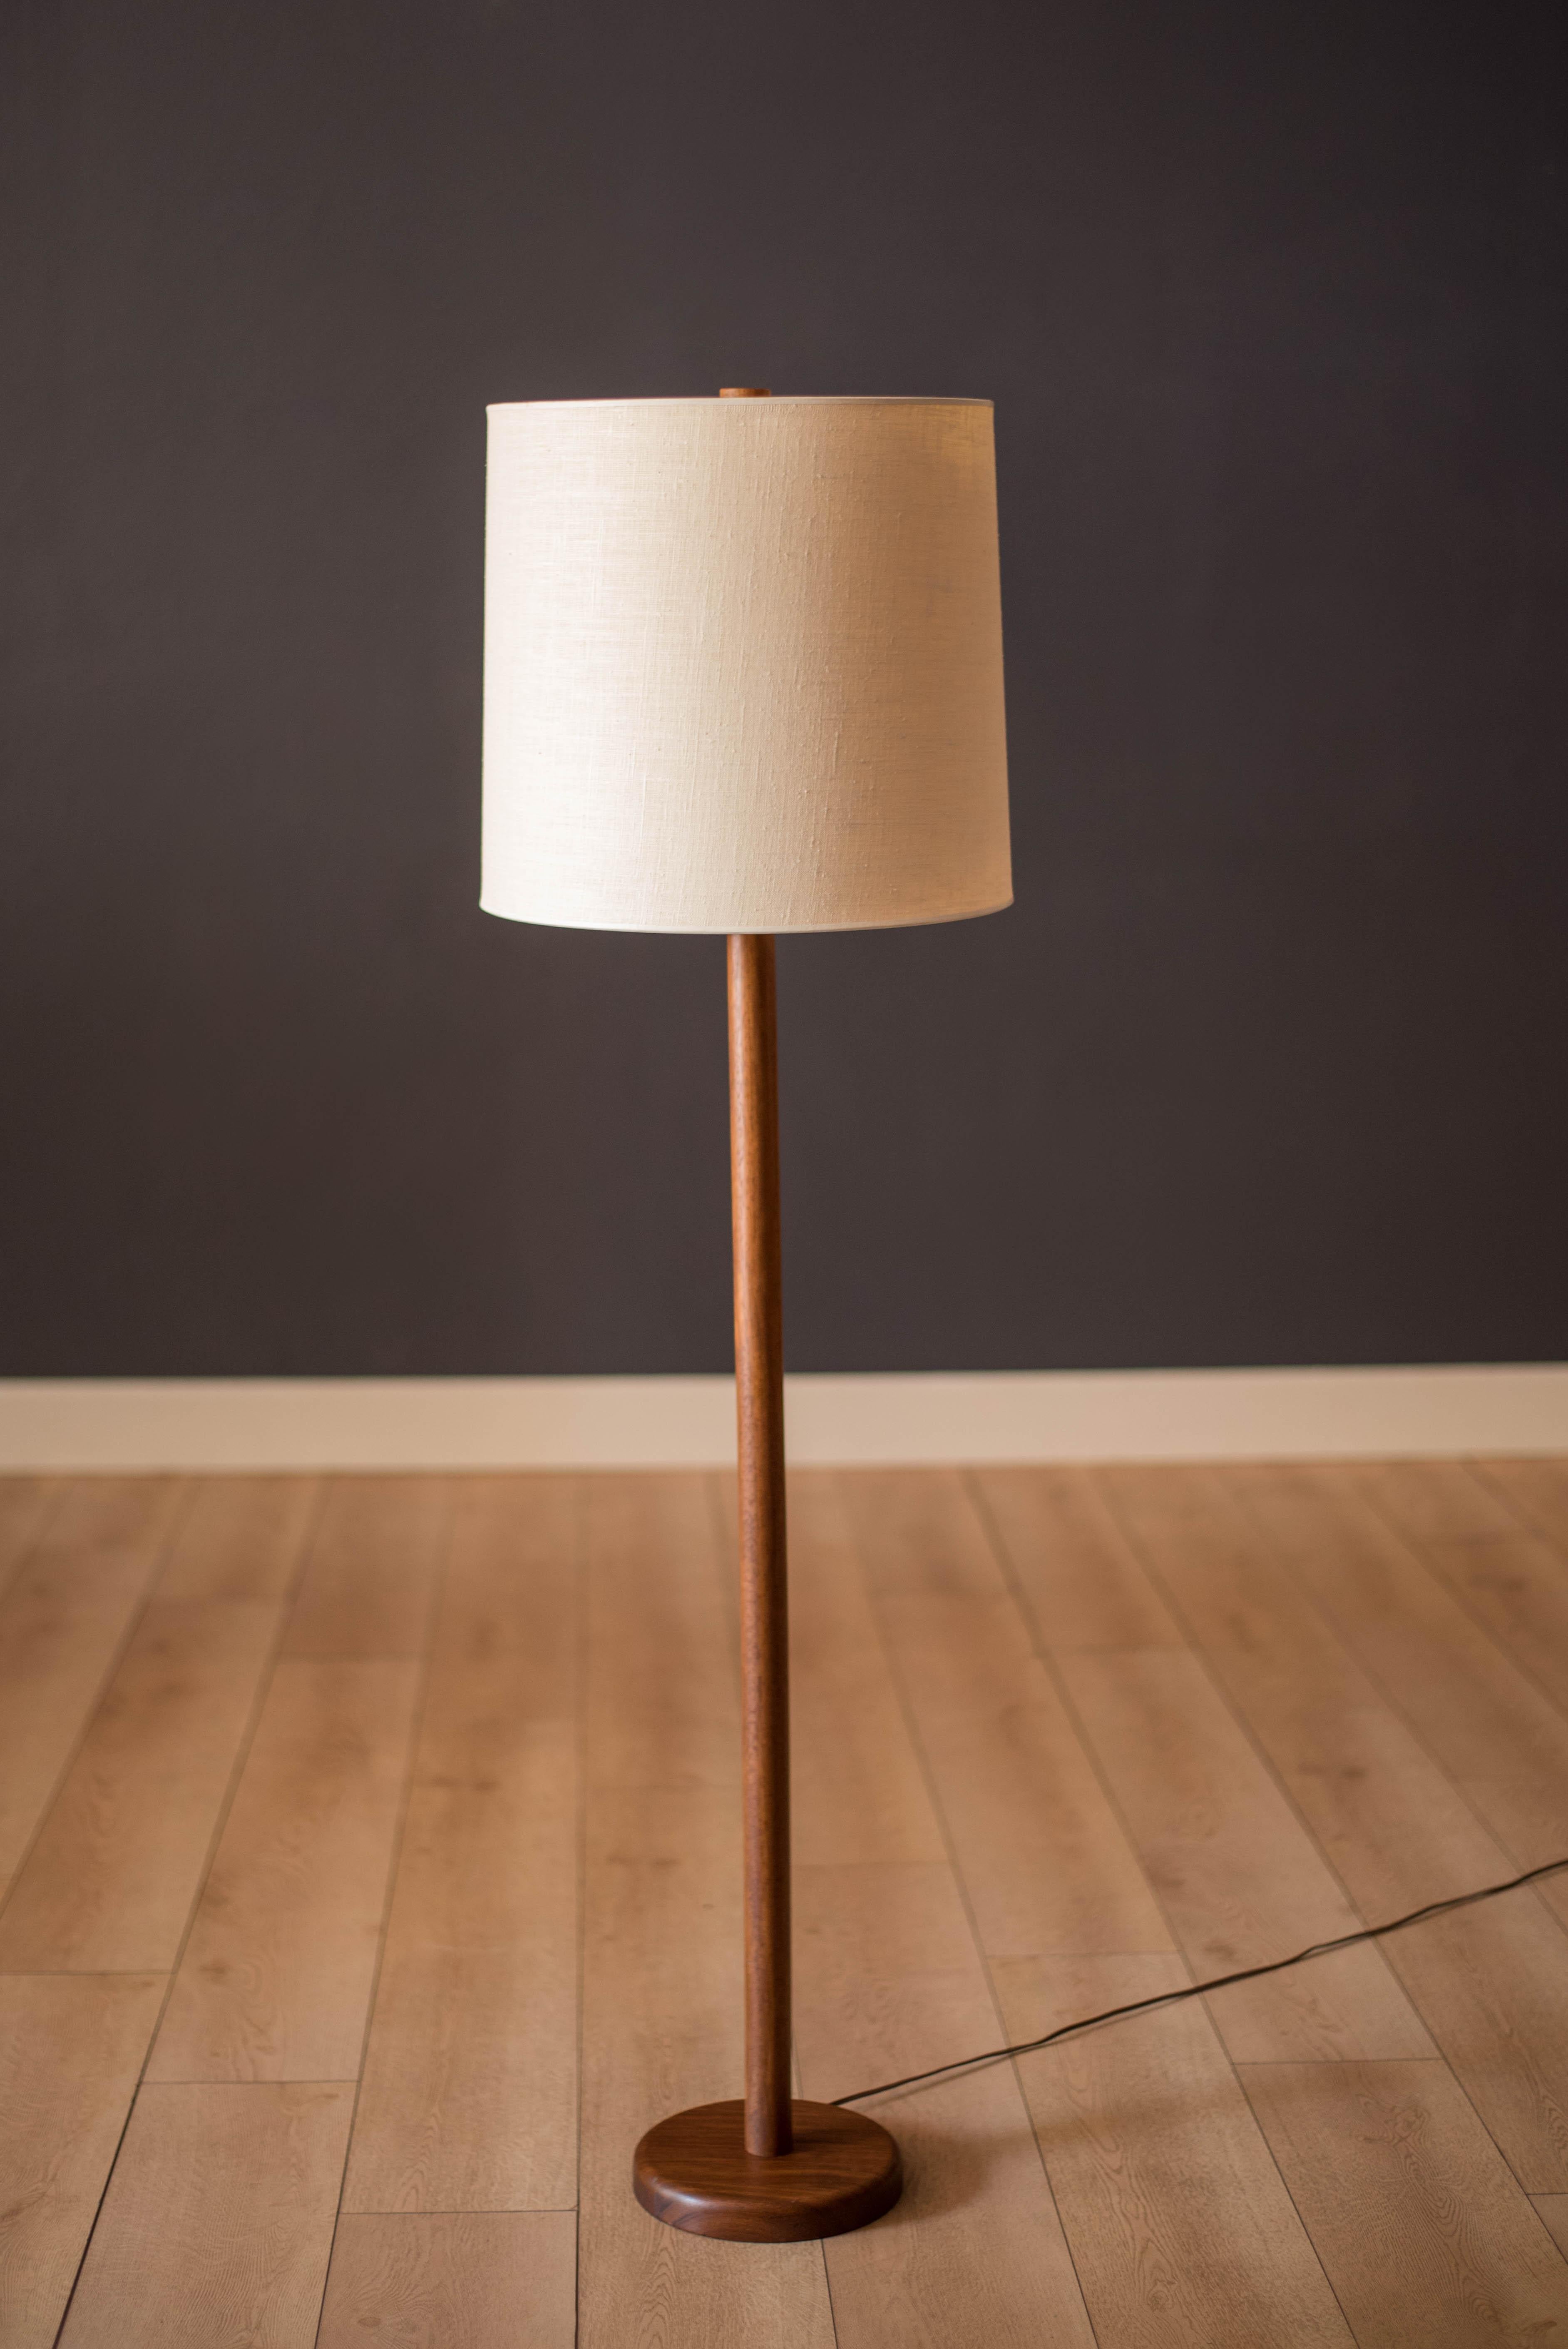 Mid-Century Modern floor lamp base in walnut designed by Jane and Gordon Martz for Marshall Studios circa 1960s. This Classic design features a three-way switch mechanism and walnut wood finial. The lamp shade is not included.